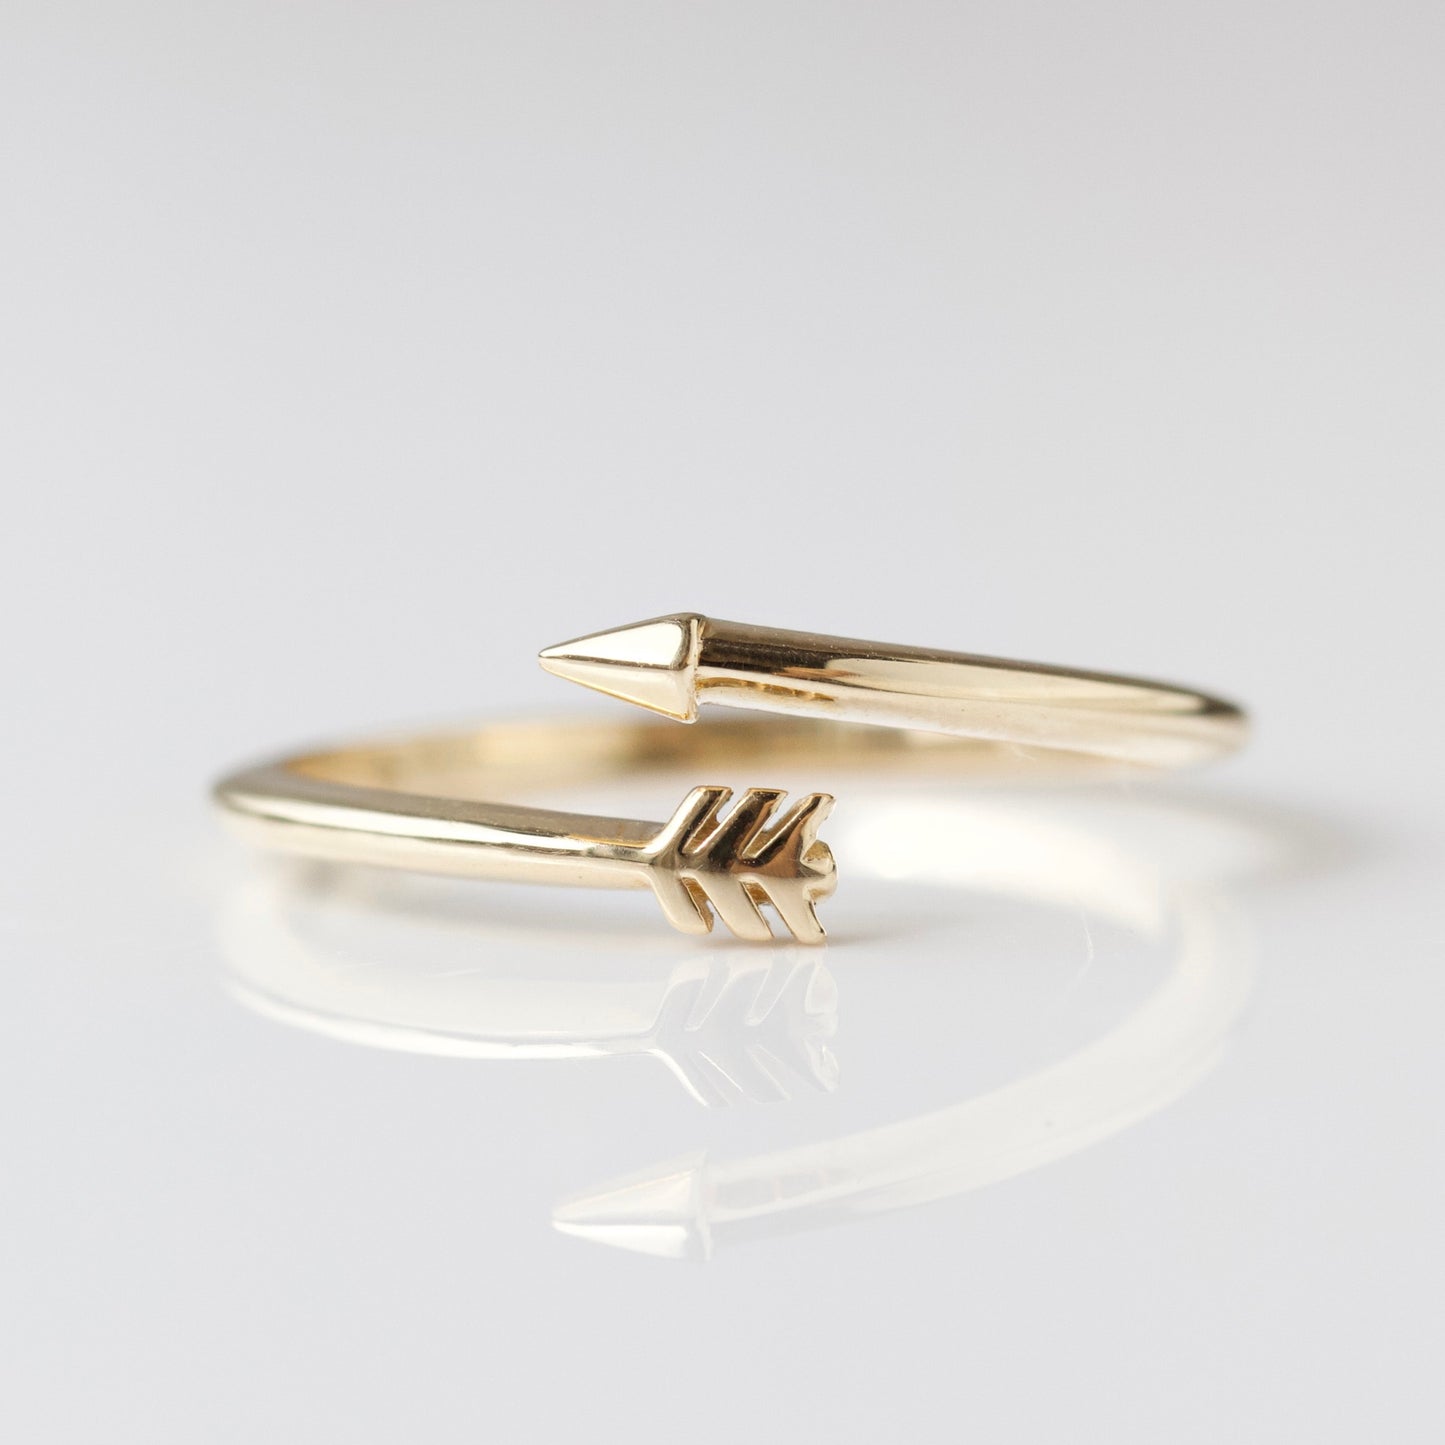 Solid gold cupids arrow ring 